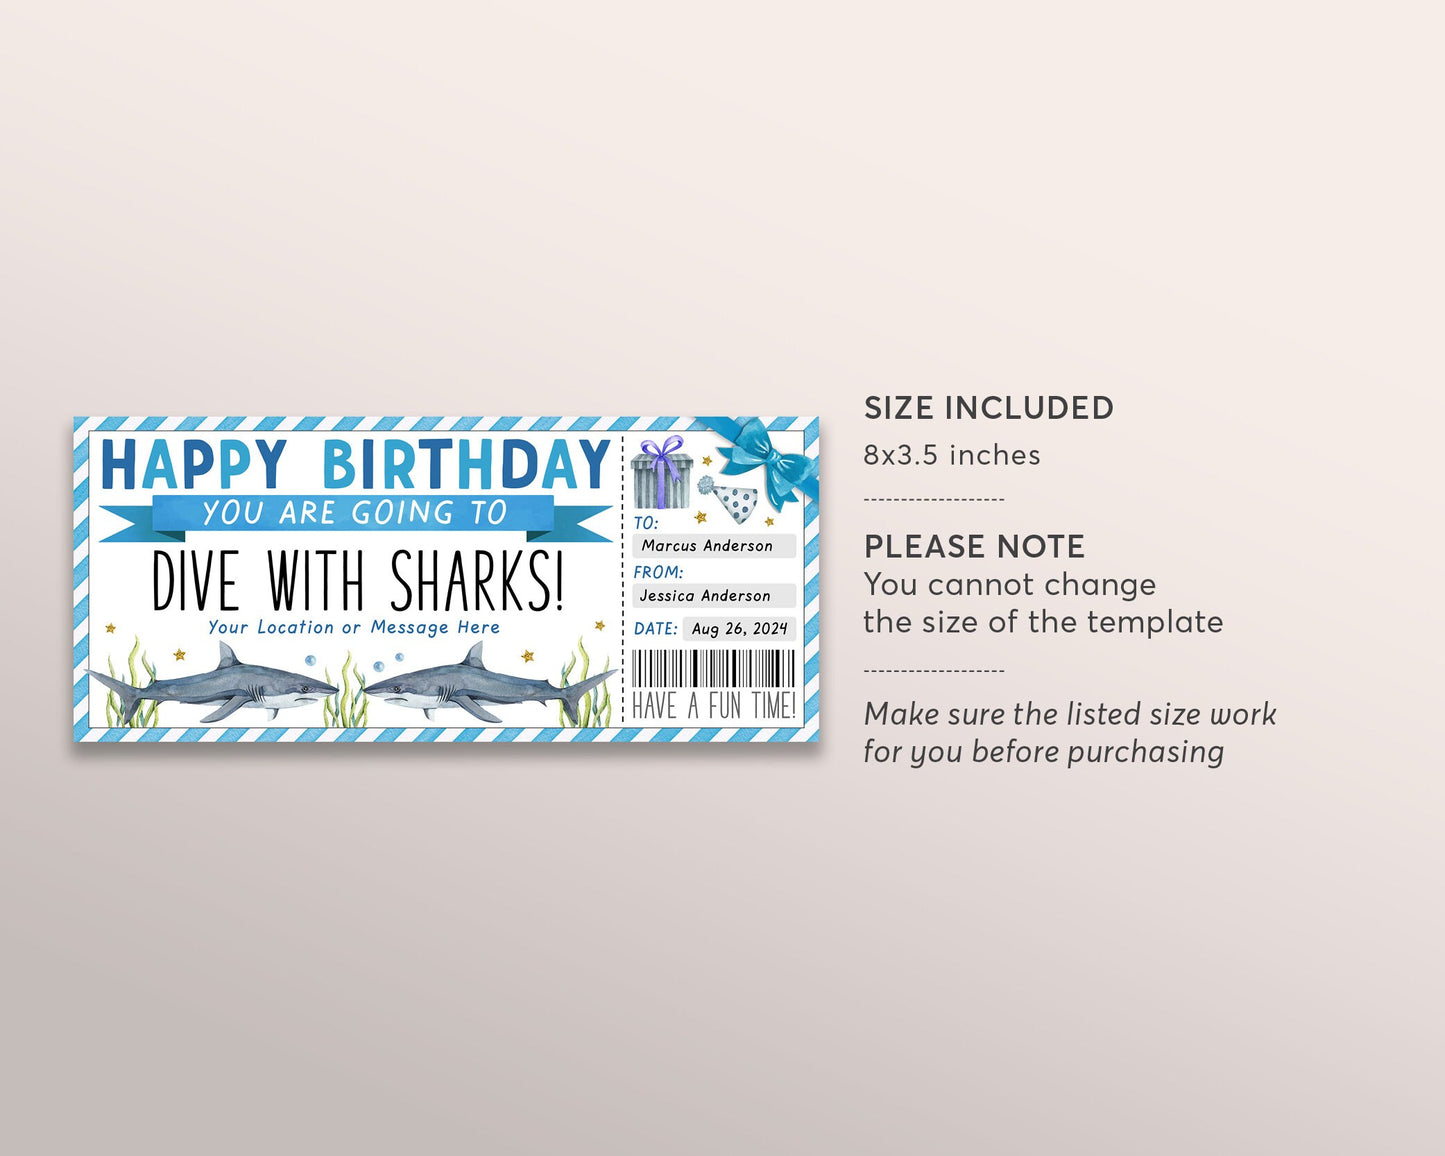 Dive With Sharks Ticket Editable Template, Birthday Surprise Cage Diving Experience Voucher Scuba Diving Trip Gift Certificate Coupon DIY